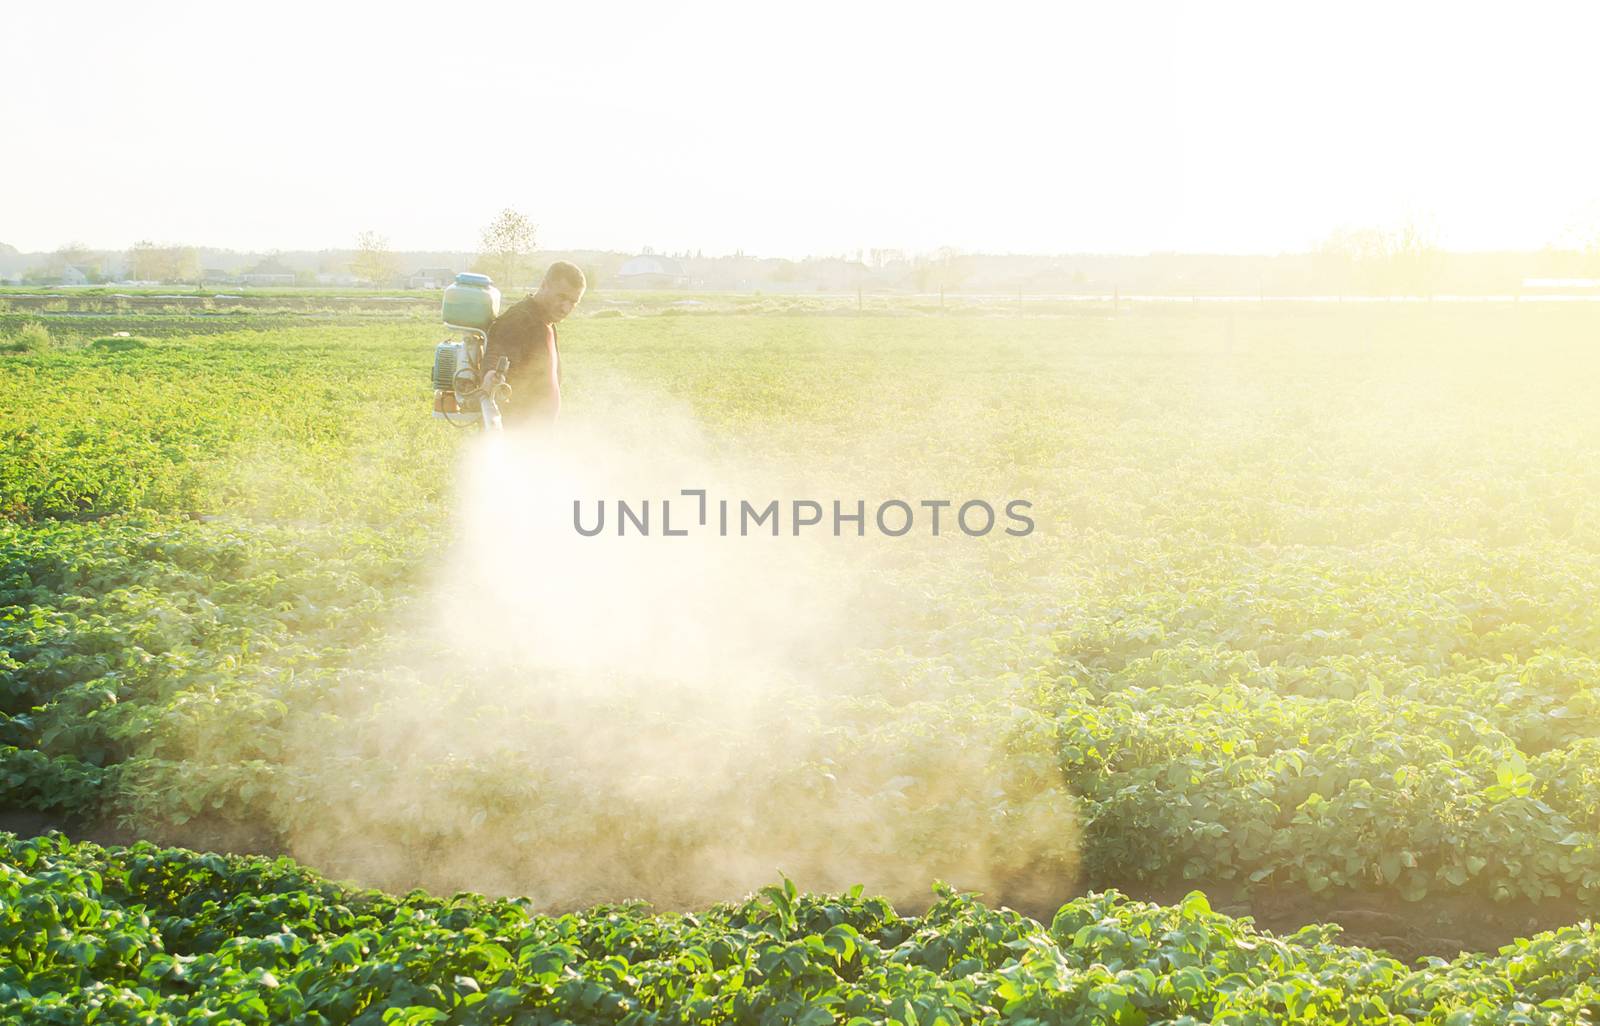 A farmer sprays a cloud of pesticides under the sun's rays on a potato plantation. Protecting against insect plants and fungal infections. Agriculture and agribusiness, agricultural industry.